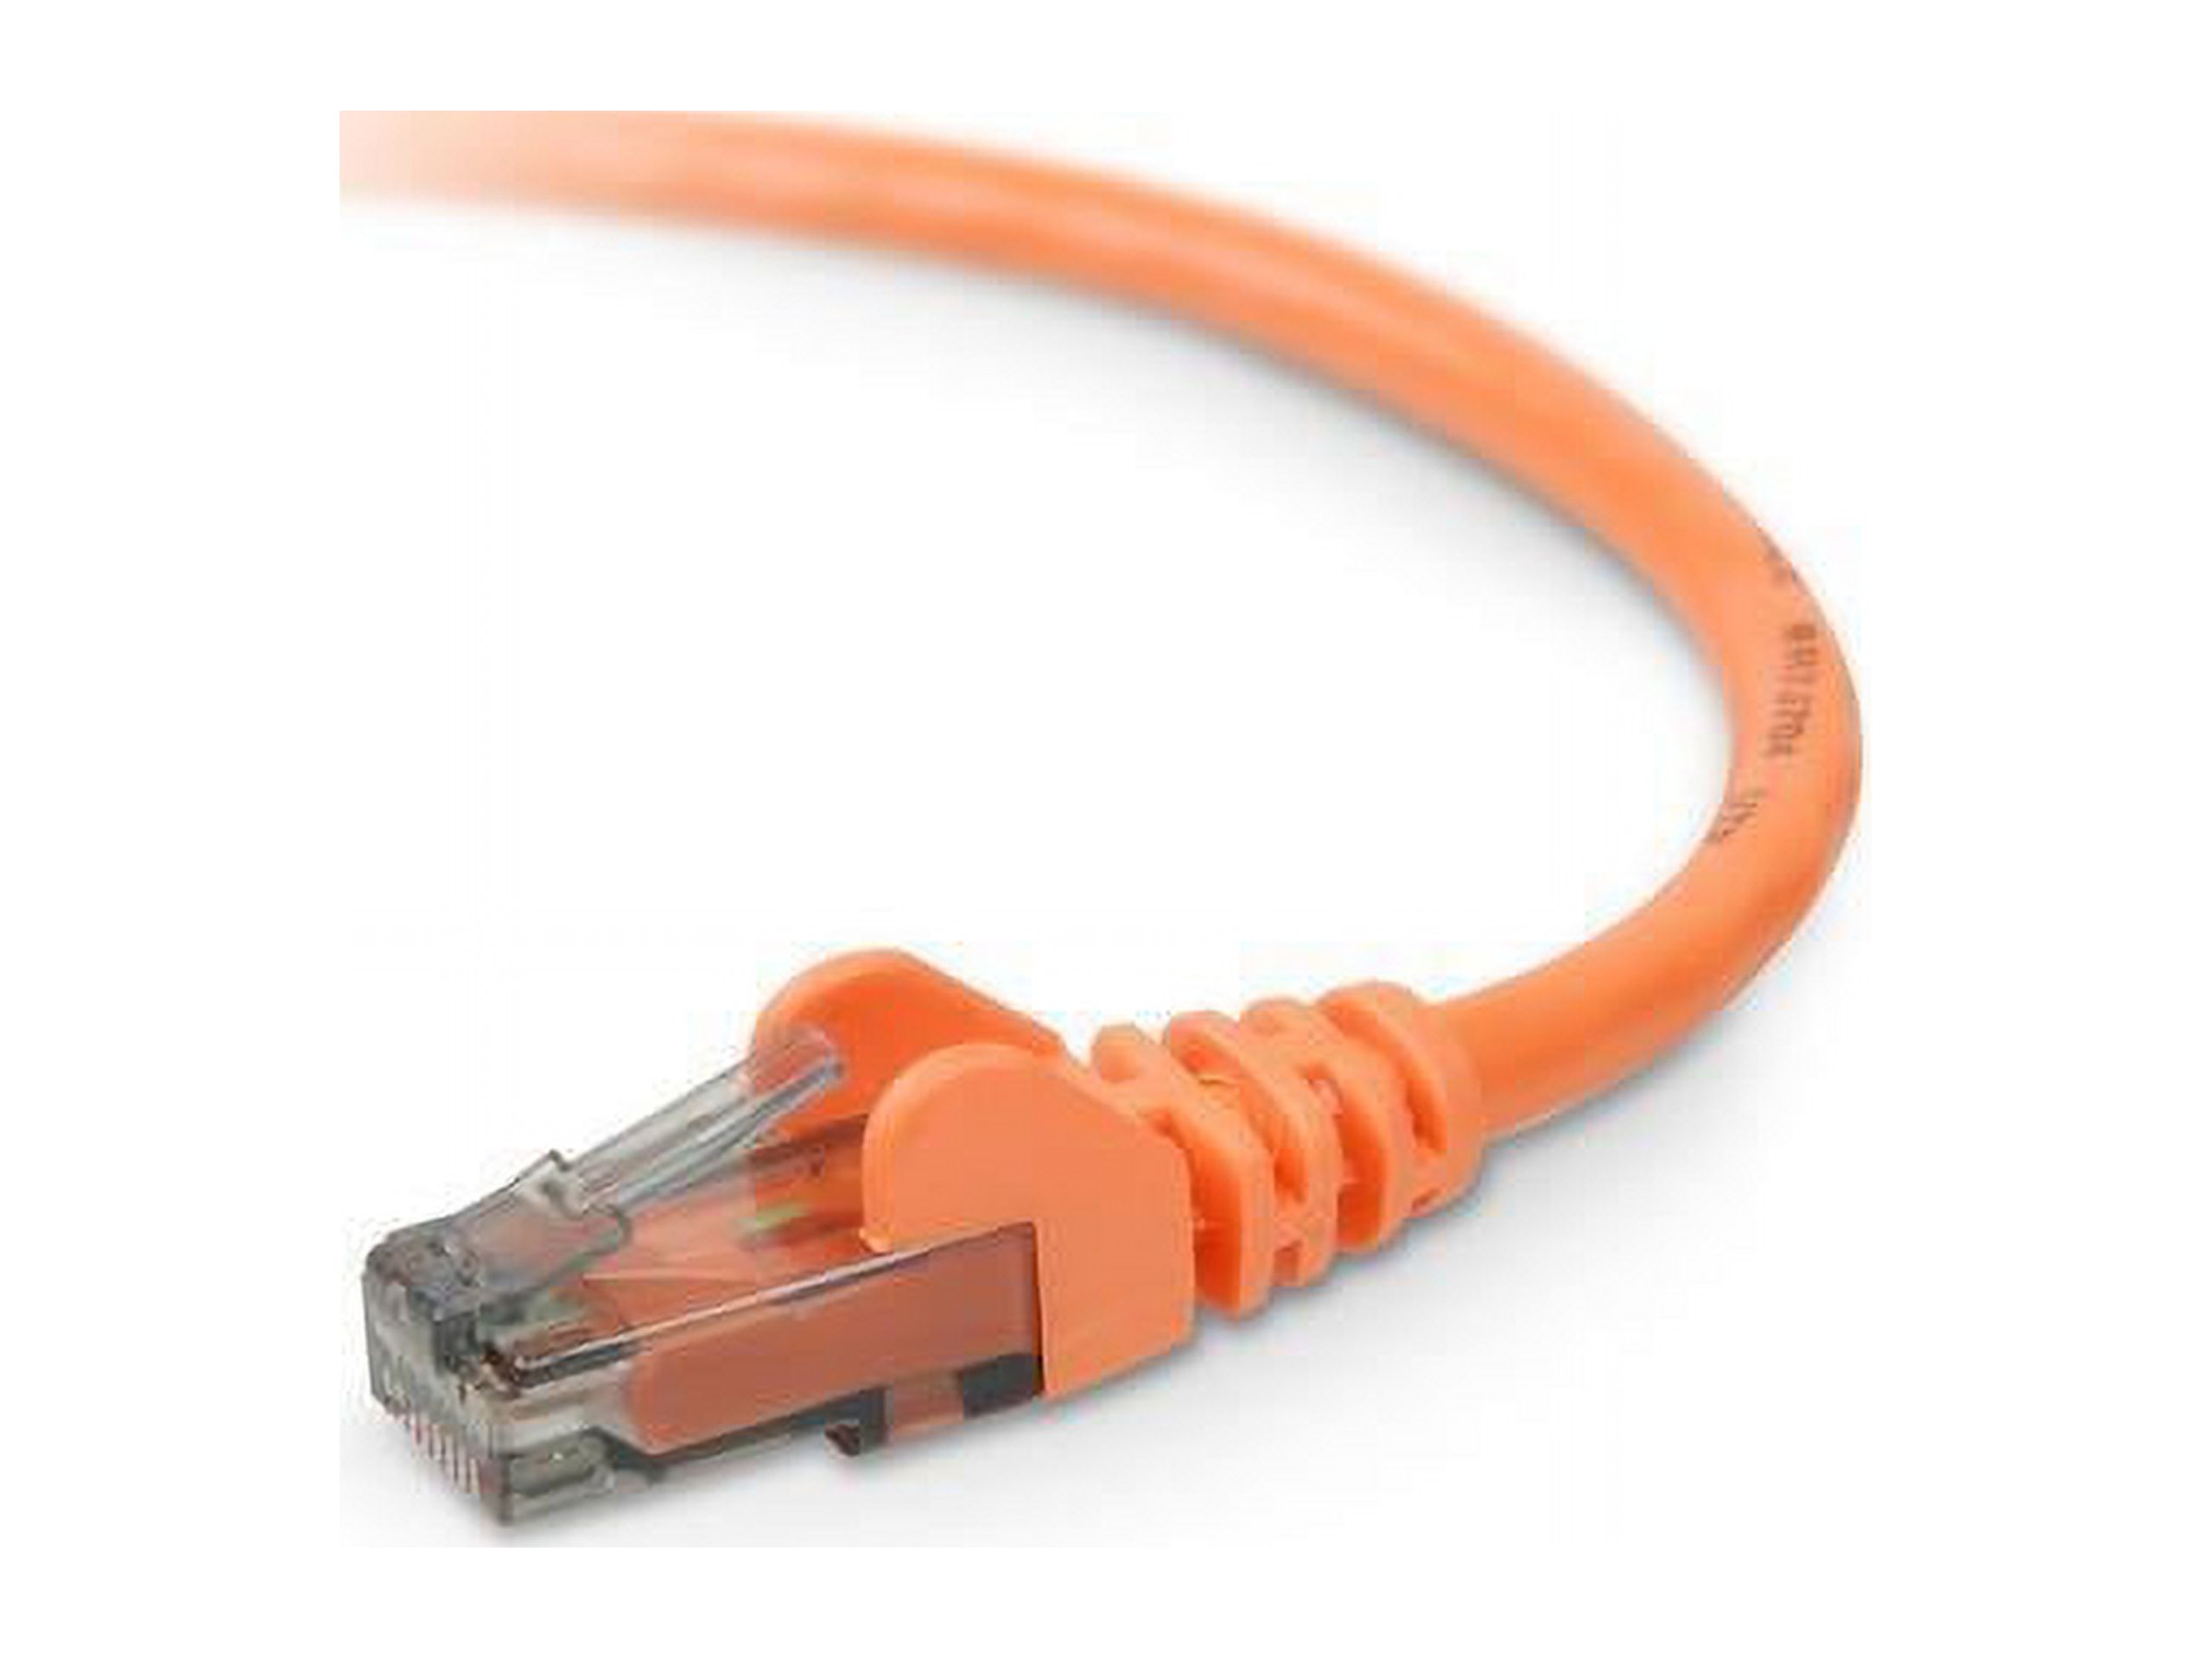 Belkin Cat. 6 UTP Patch Cable - image 1 of 2